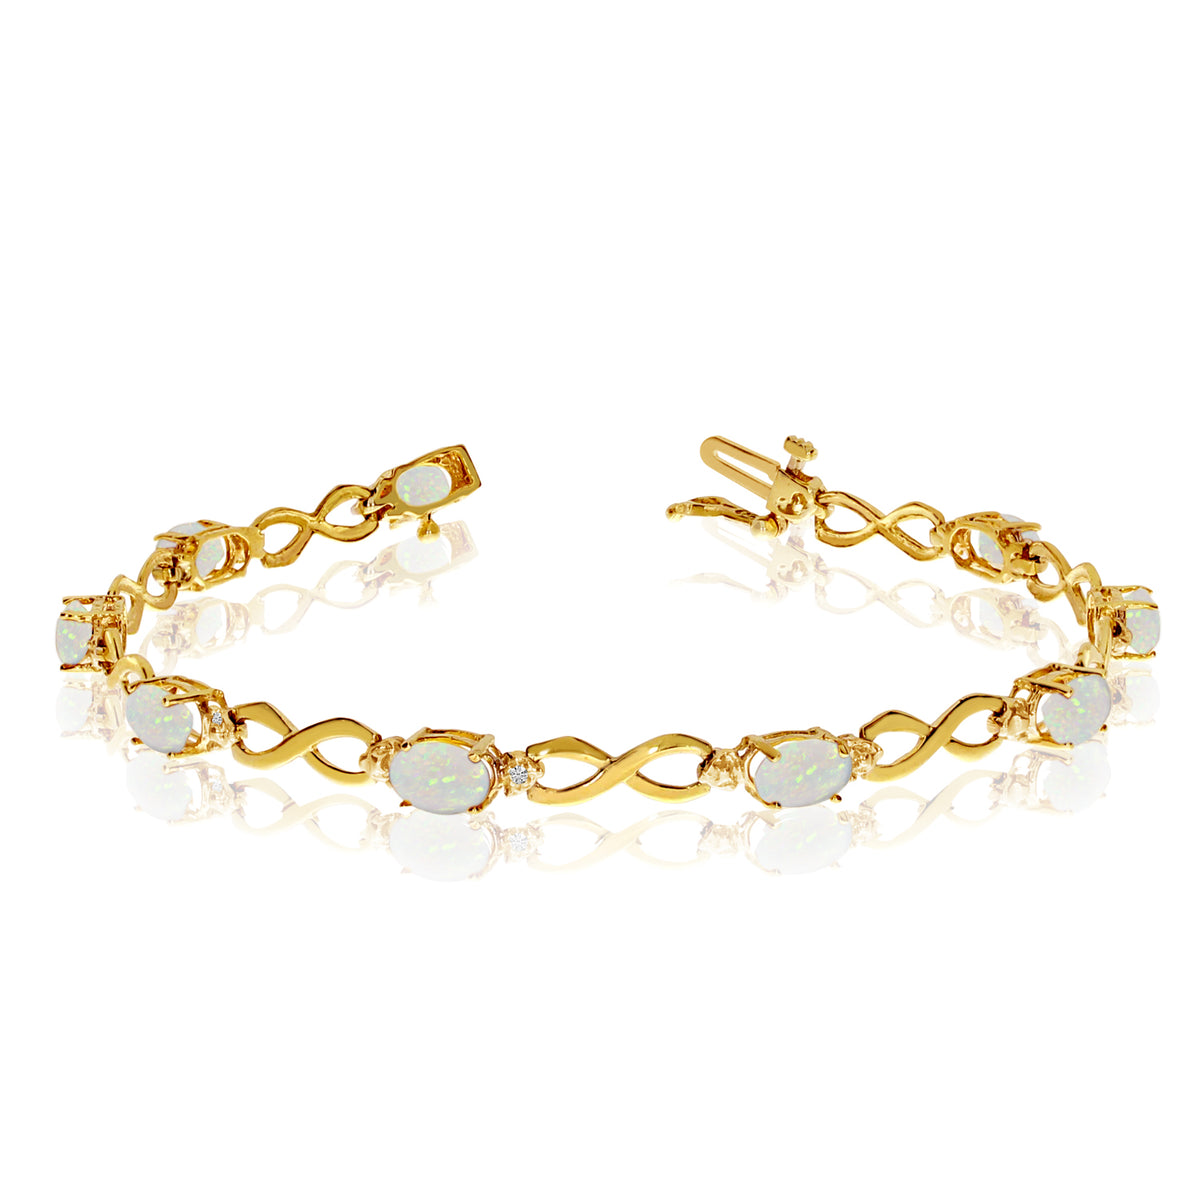 14K Yellow Gold Oval Opal Stones And Diamonds Infinity Tennis Bracelet, 7" fine designer jewelry for men and women